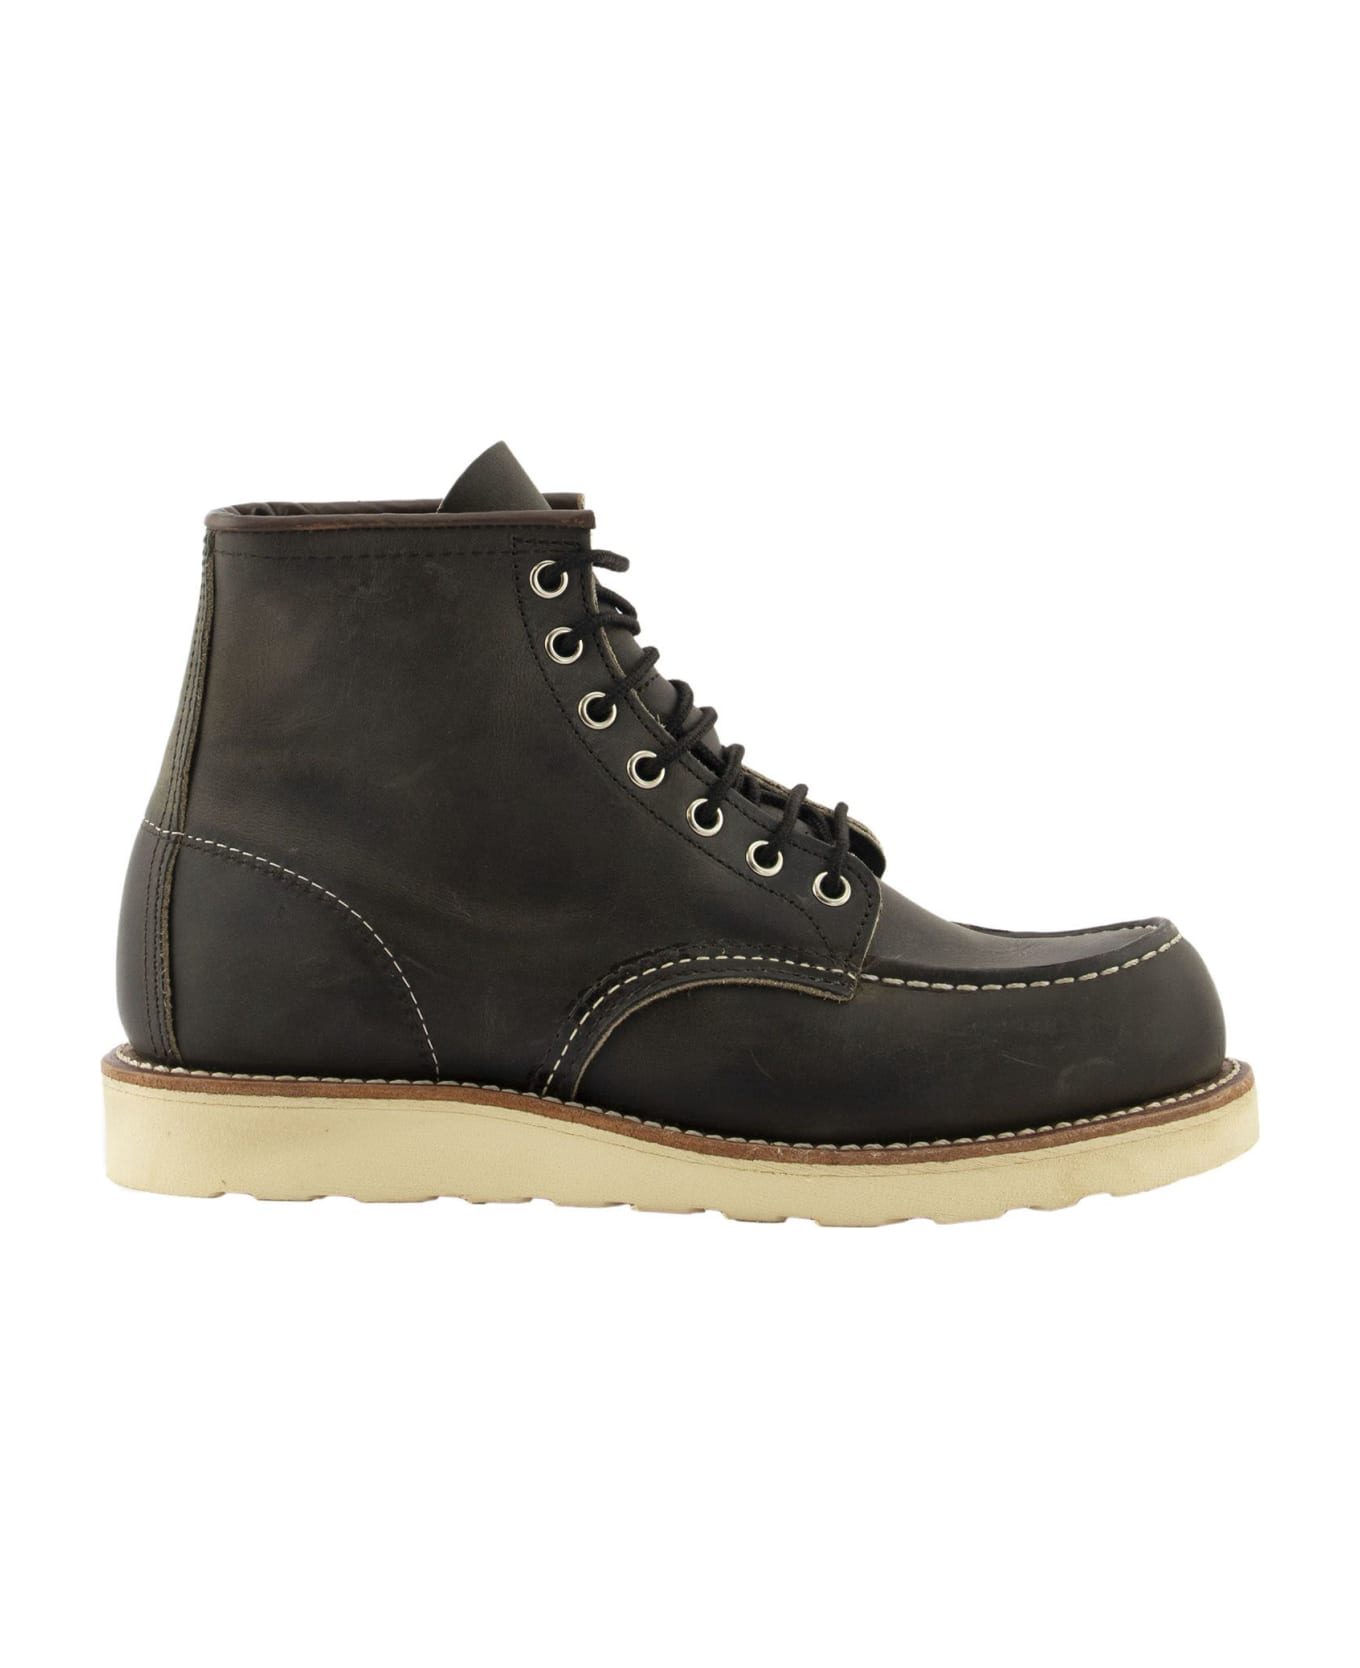 Red Wing Classic Moc - Rough And Tough Leather Boot - Charcoal ブーツ